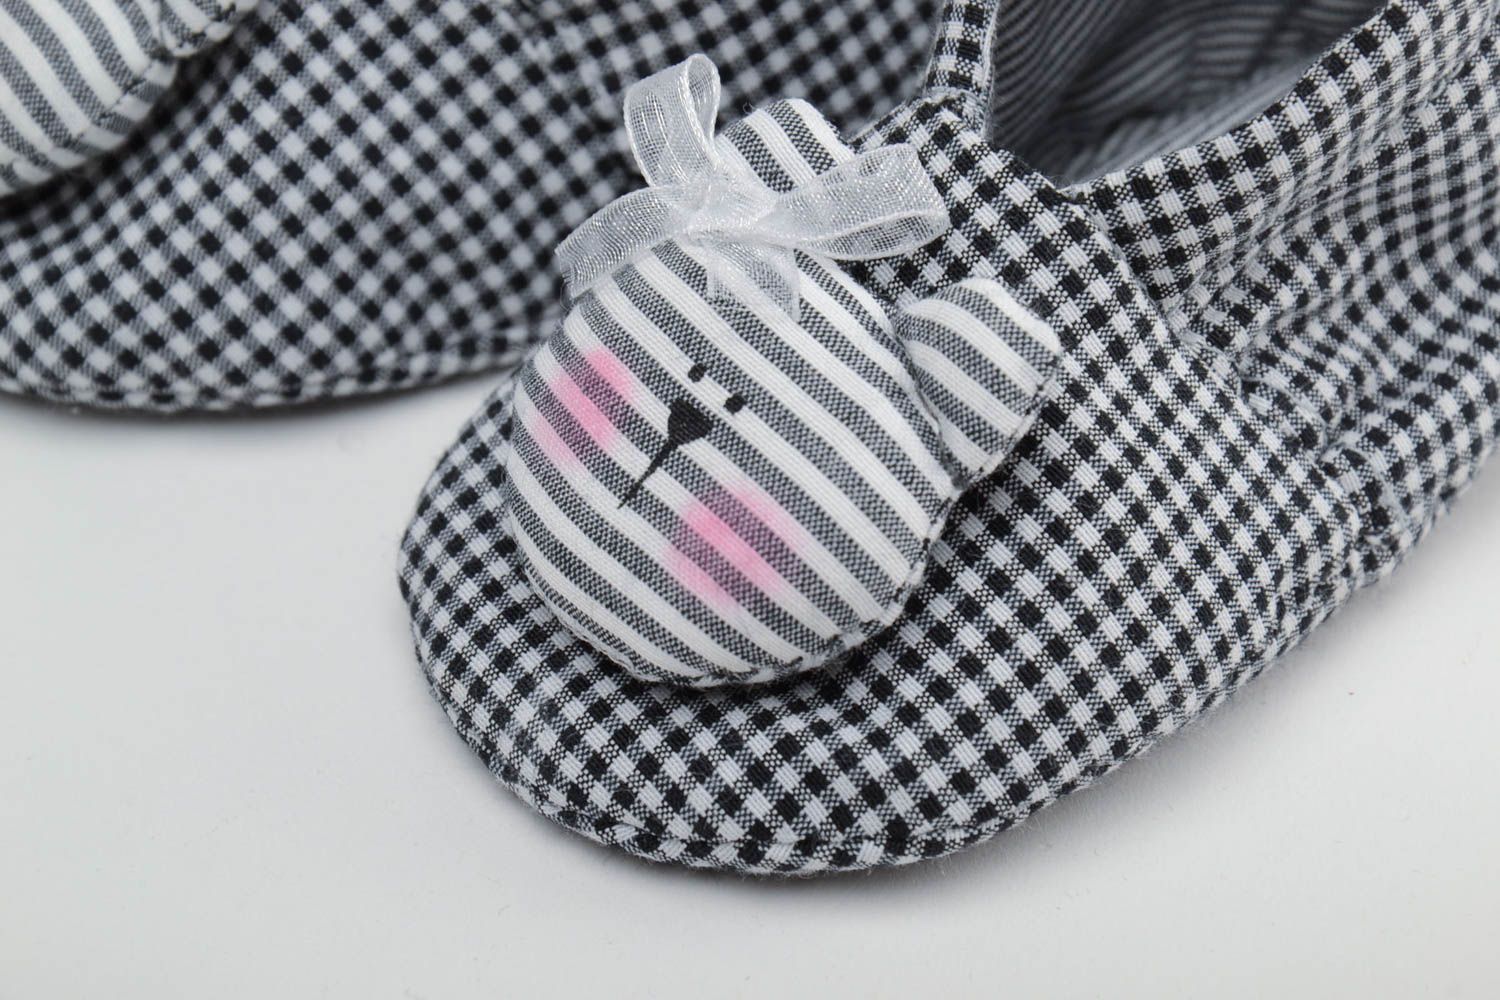 Handmade baby shoes sewn of checkered cotton fabric with metal buttons Bears photo 3